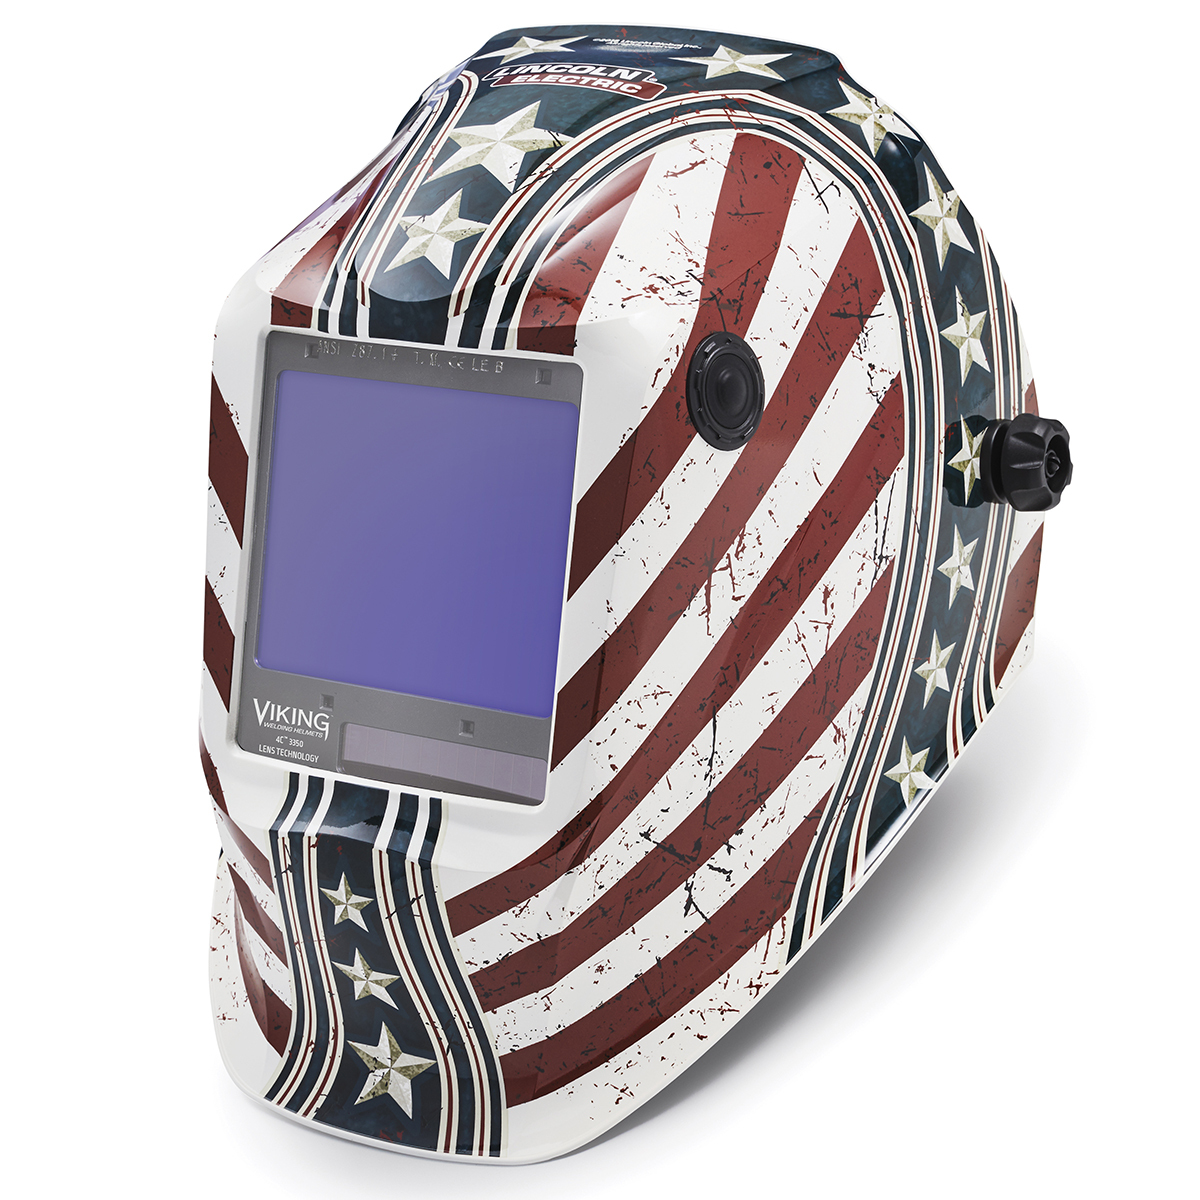 Lincoln Electric® VIKING® 3350 Red/White/Blue Welding Helmet With Variable Shades 5 - 13 Auto Darkening Lens, 4C® Lens Technolog